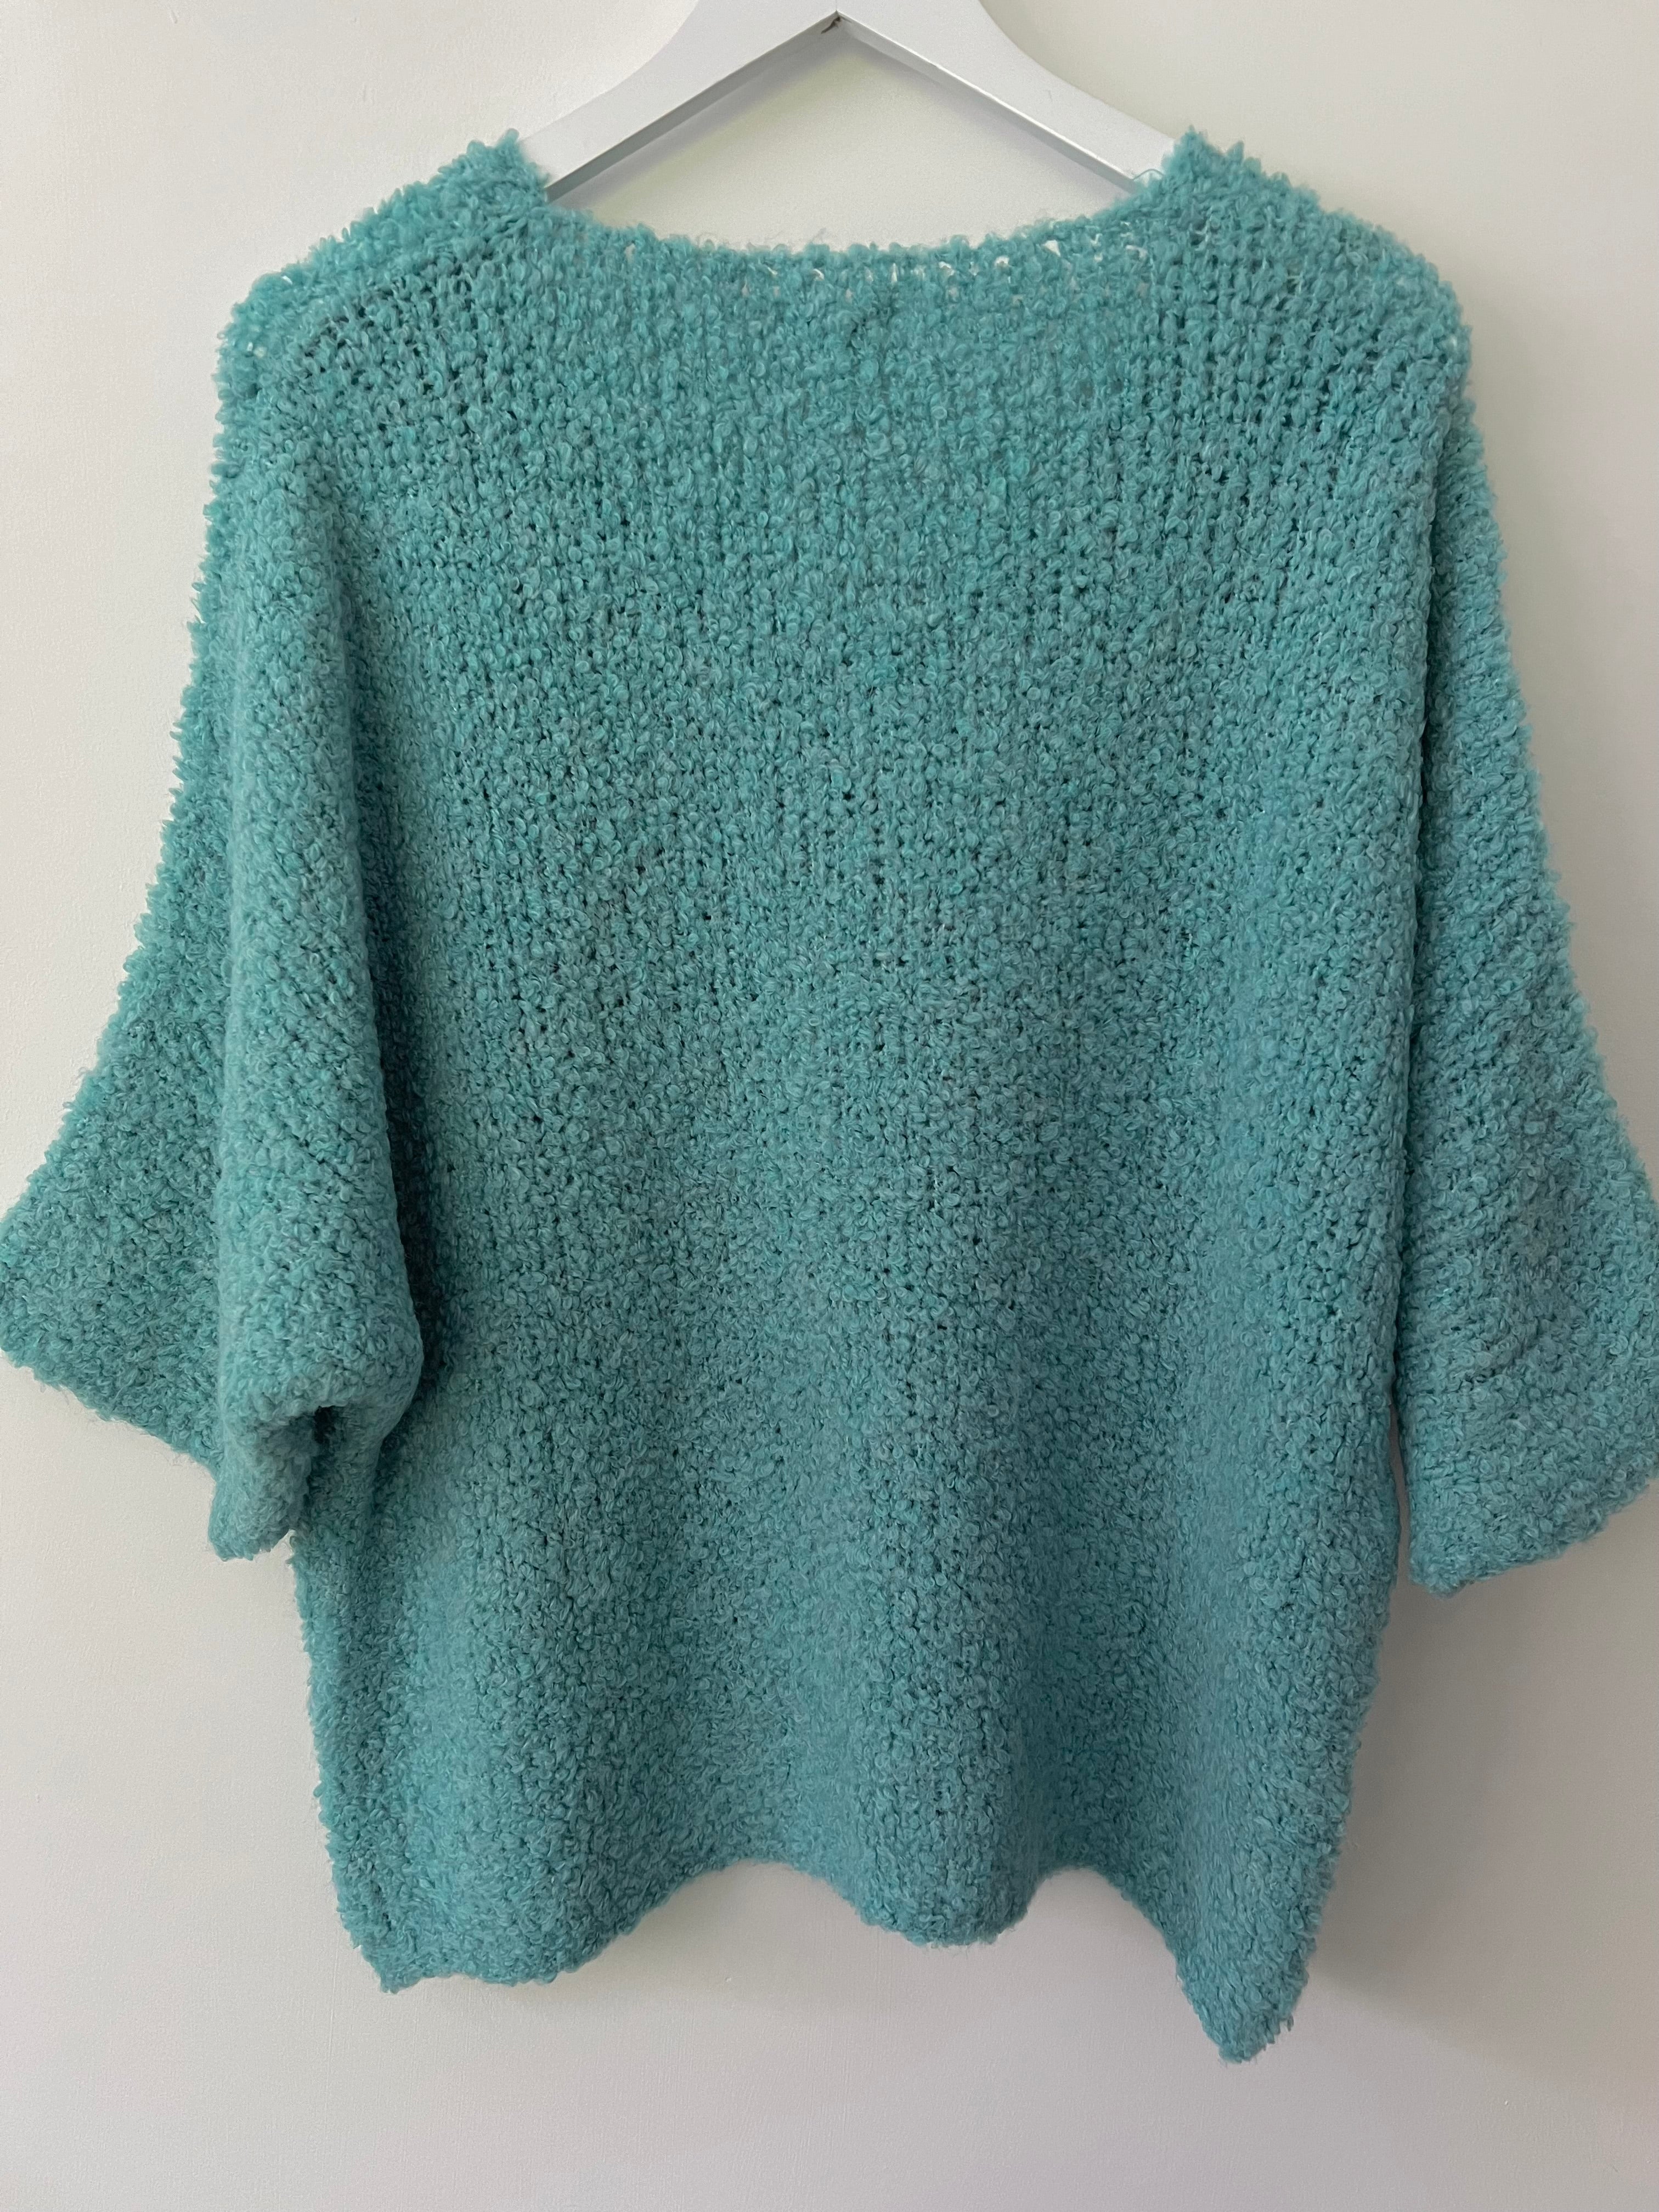 Cropped Sleeve Boucle Knit in Aqua Green